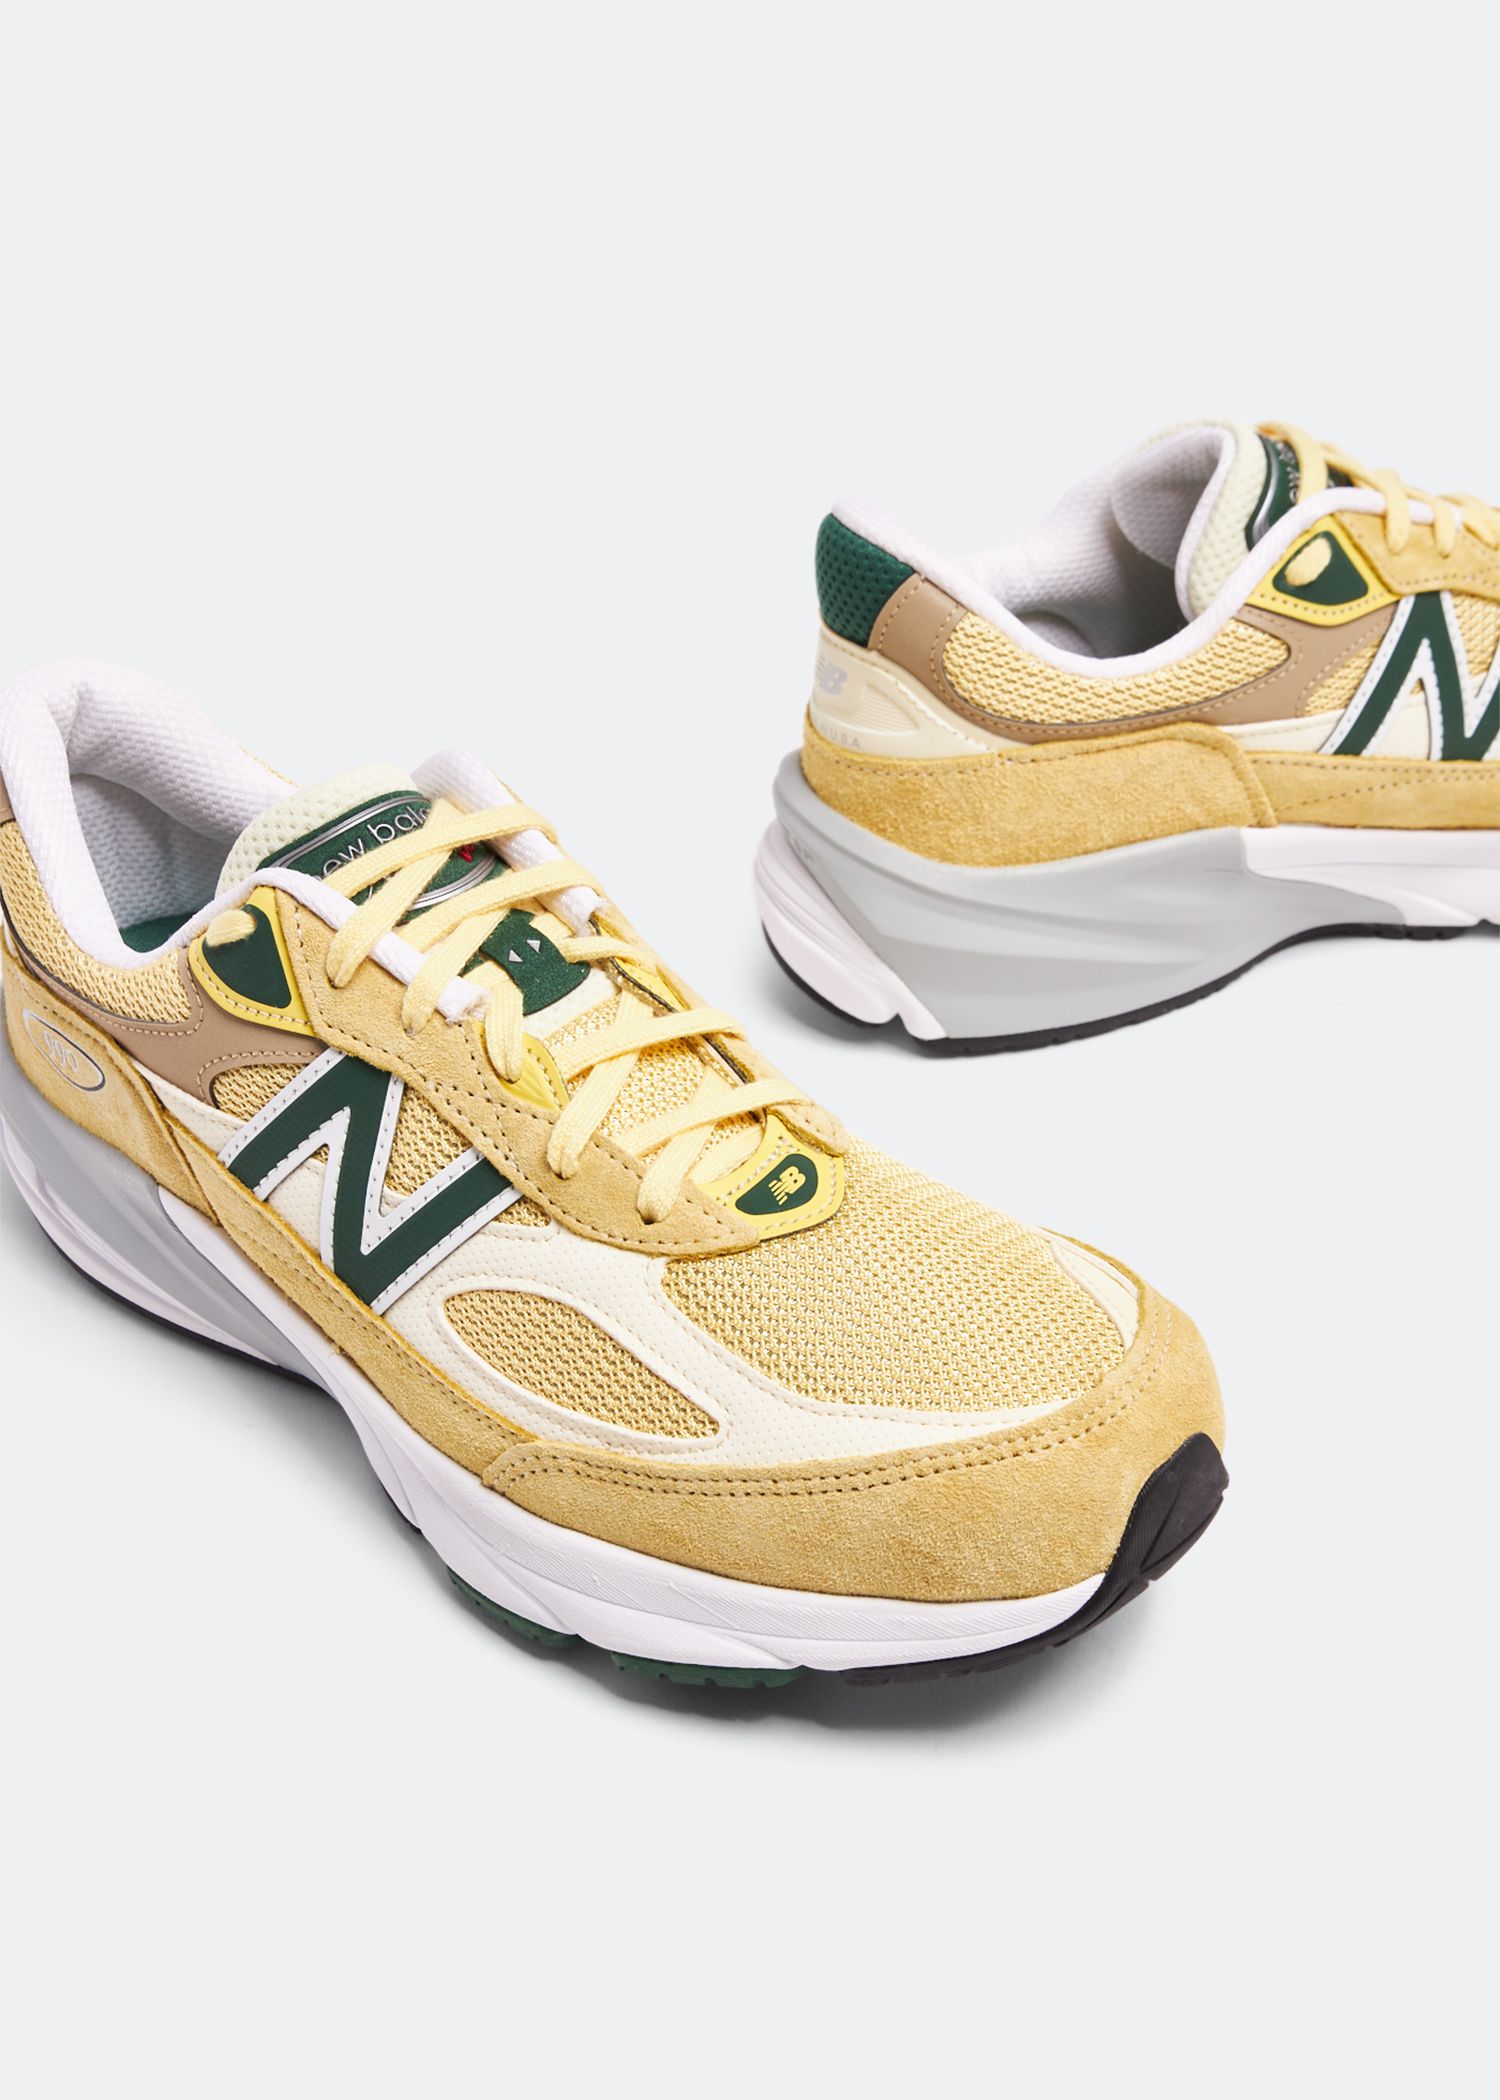 The Next New Balance 990v6 Arrives in Sulfur and Green | House of